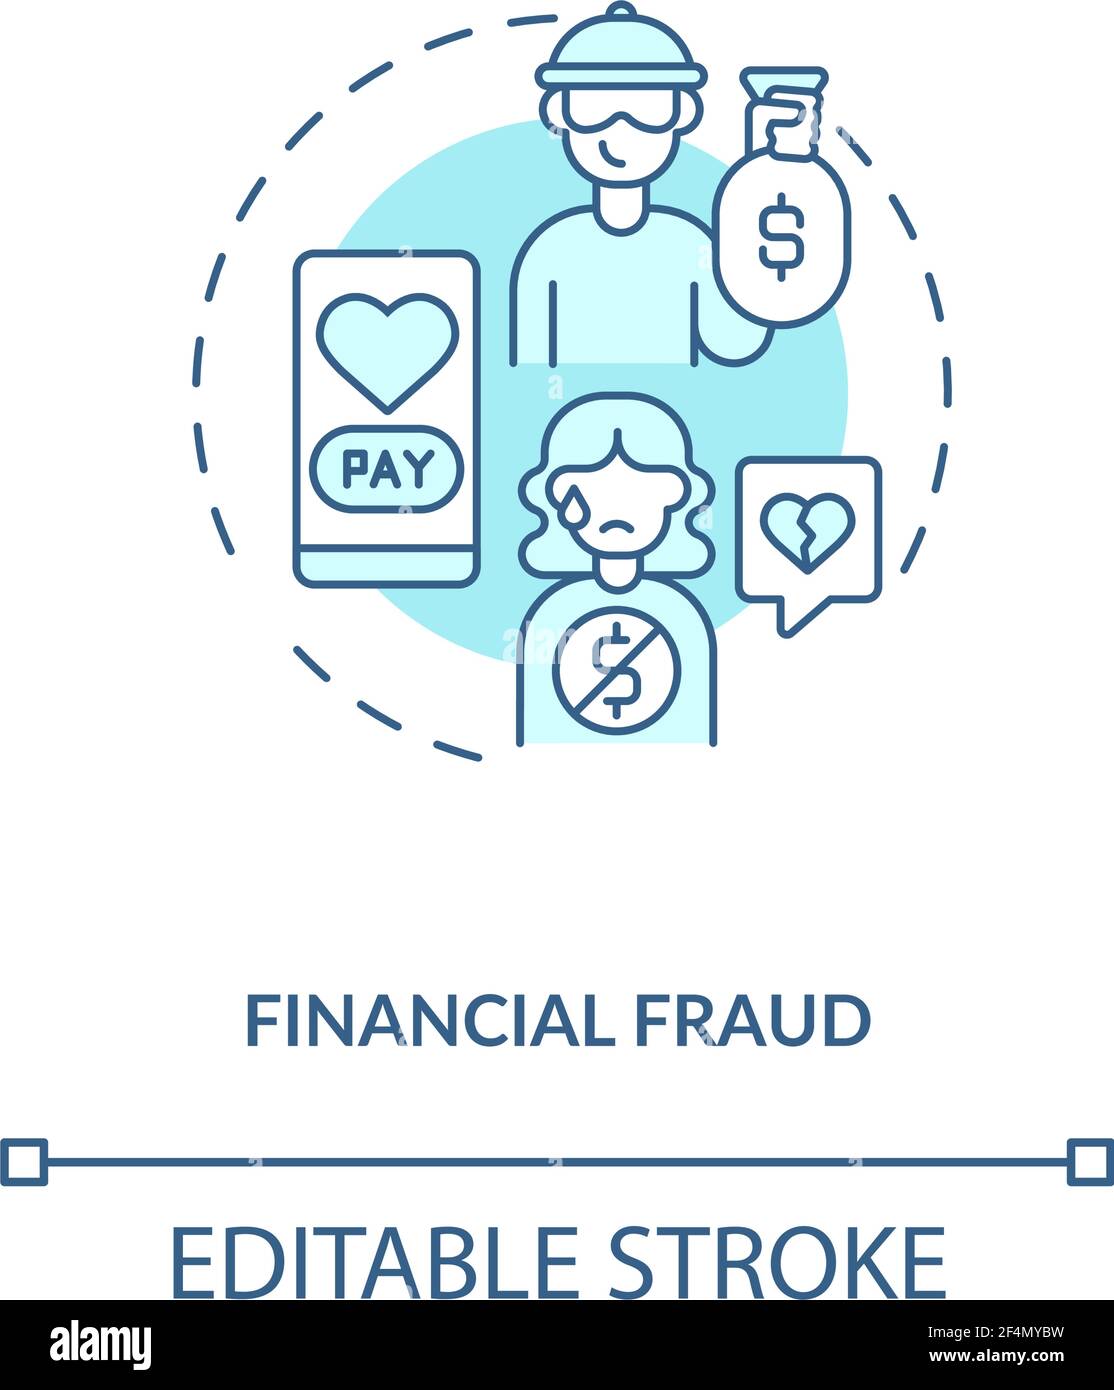 Financial fraud on dating website concept icon. Stock Vector